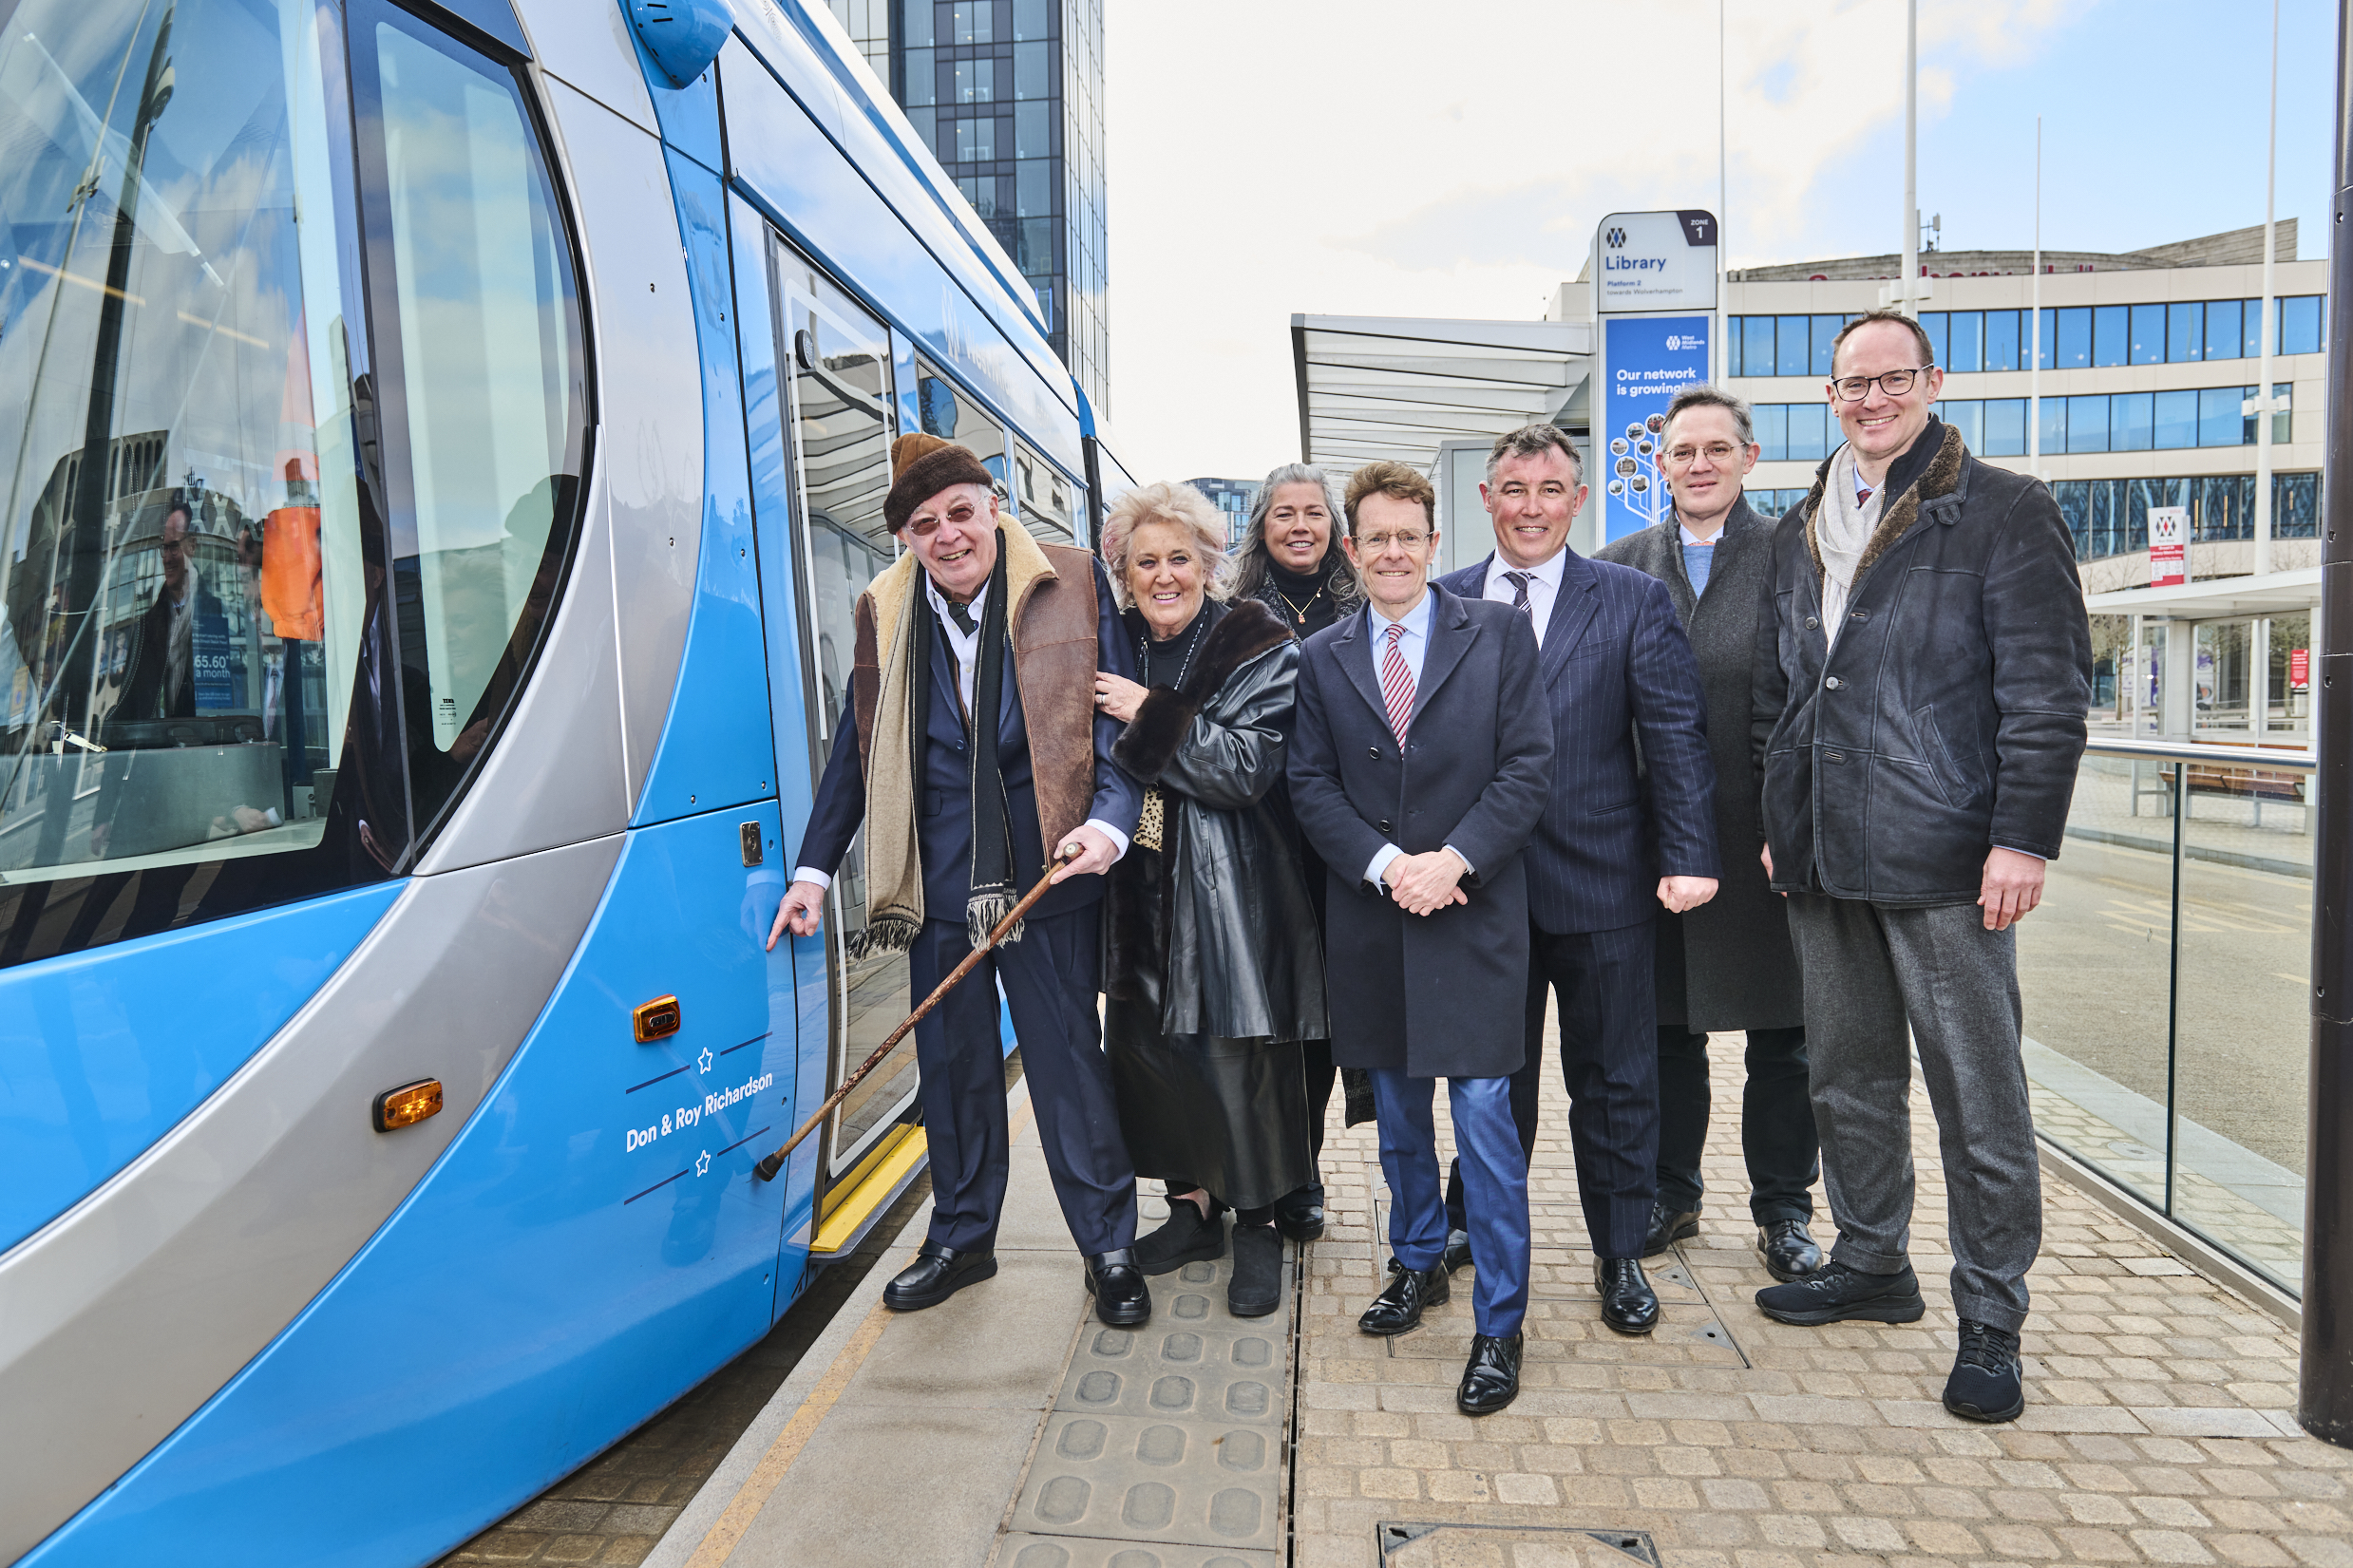 Roy Richardson and his family with the Mayor and the new tram